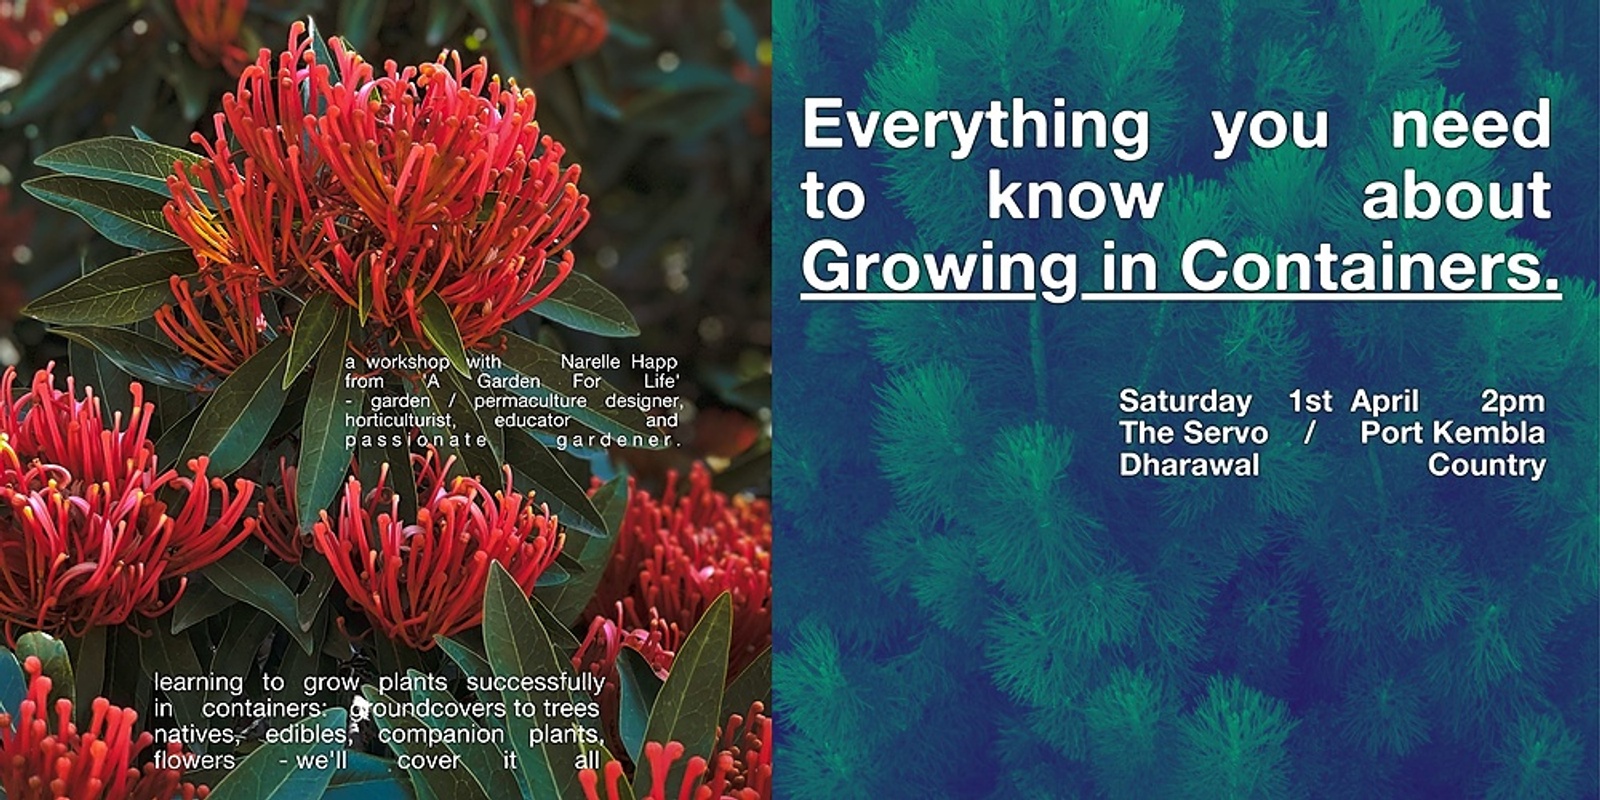 A Garden For Life Workshop - Everything you need to know about 'Growing in Containers'